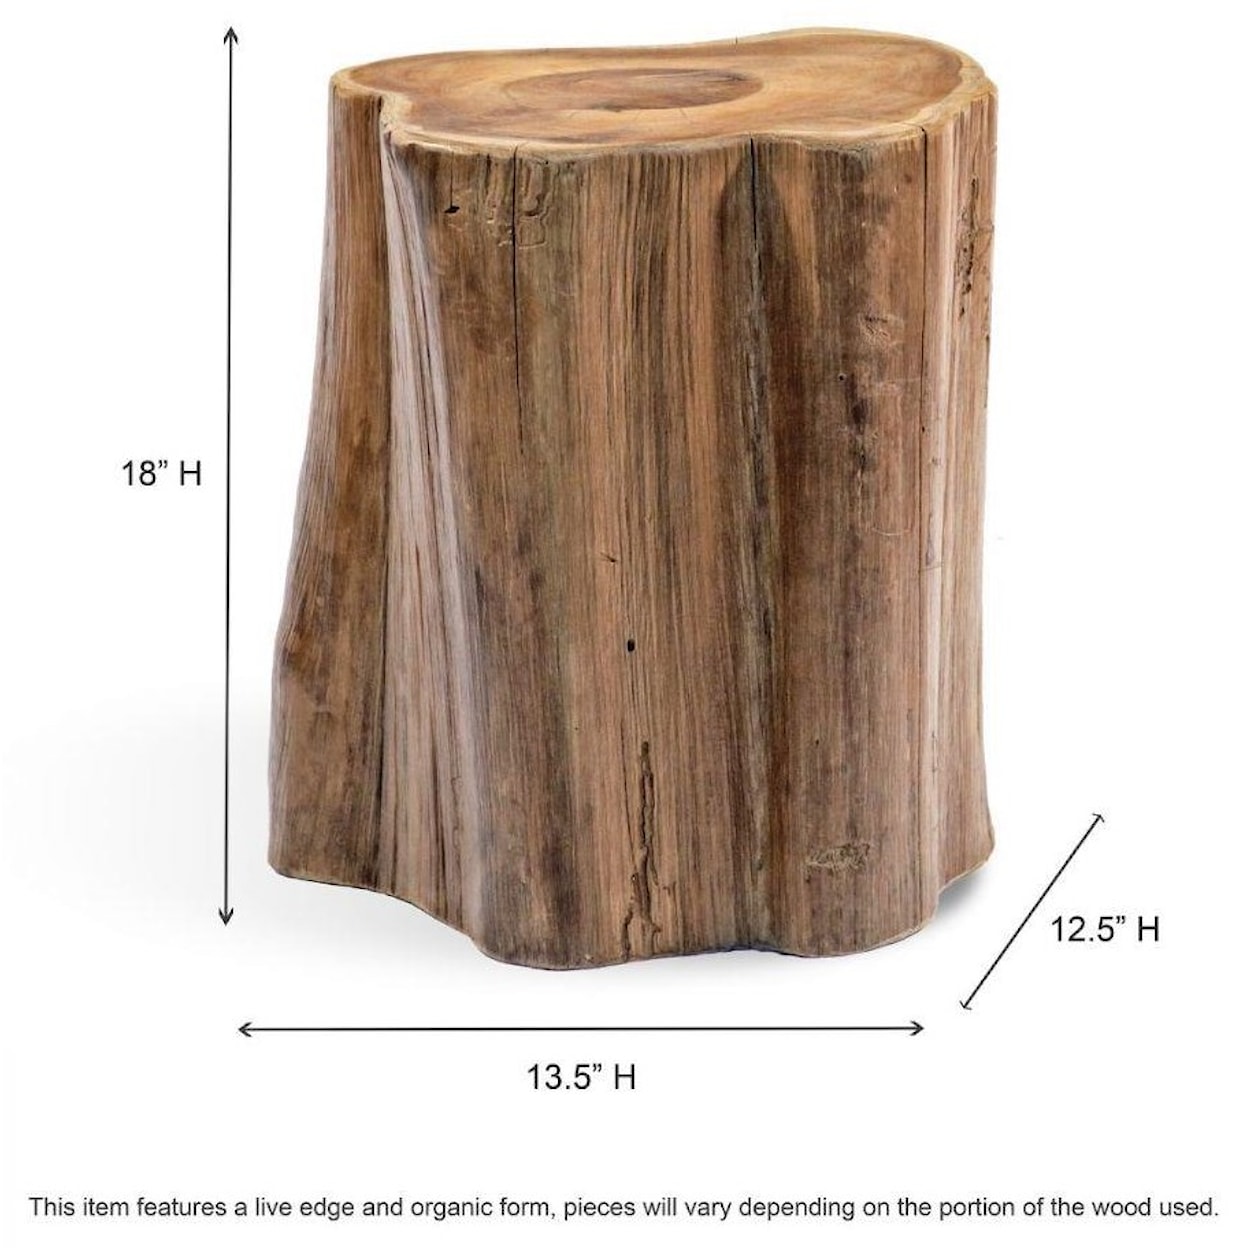 Ibolili Stools and Benches Tree Section Stool